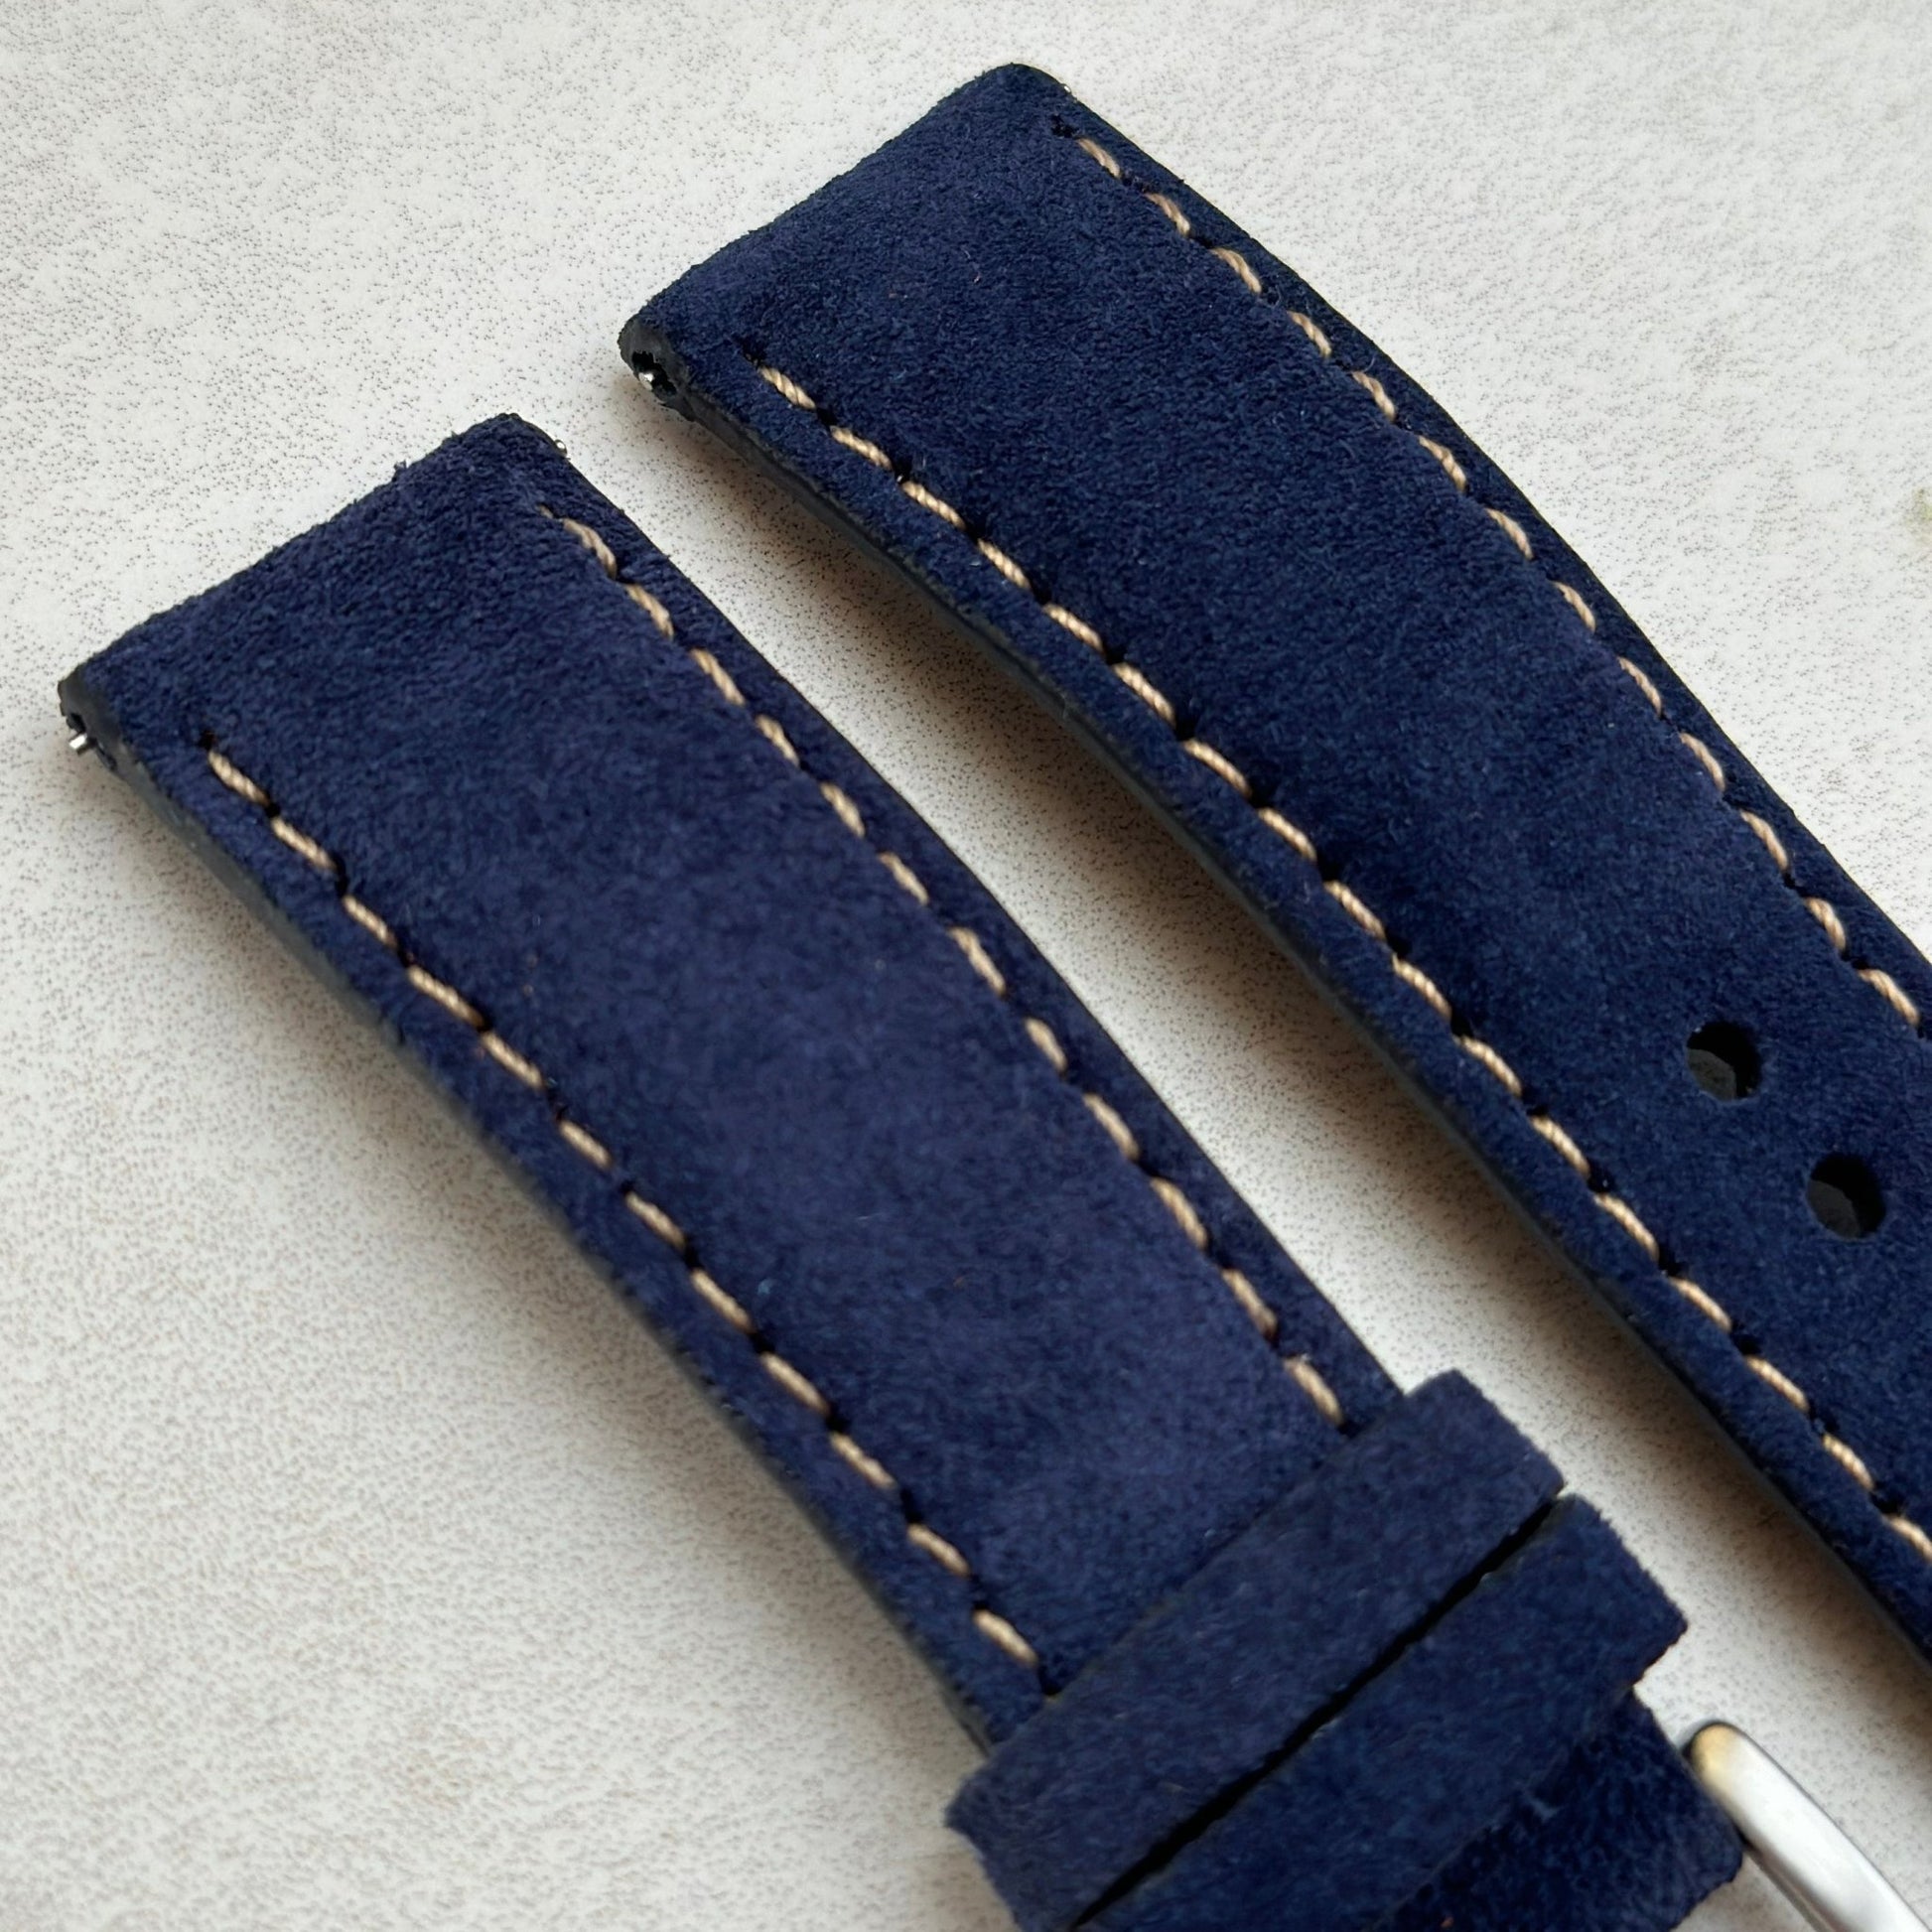 Top of the Paris navy blue suede watch strap. Ivory stitching. Padded suede watch strap. 18mm, 20mm, 22mm, 24mm.